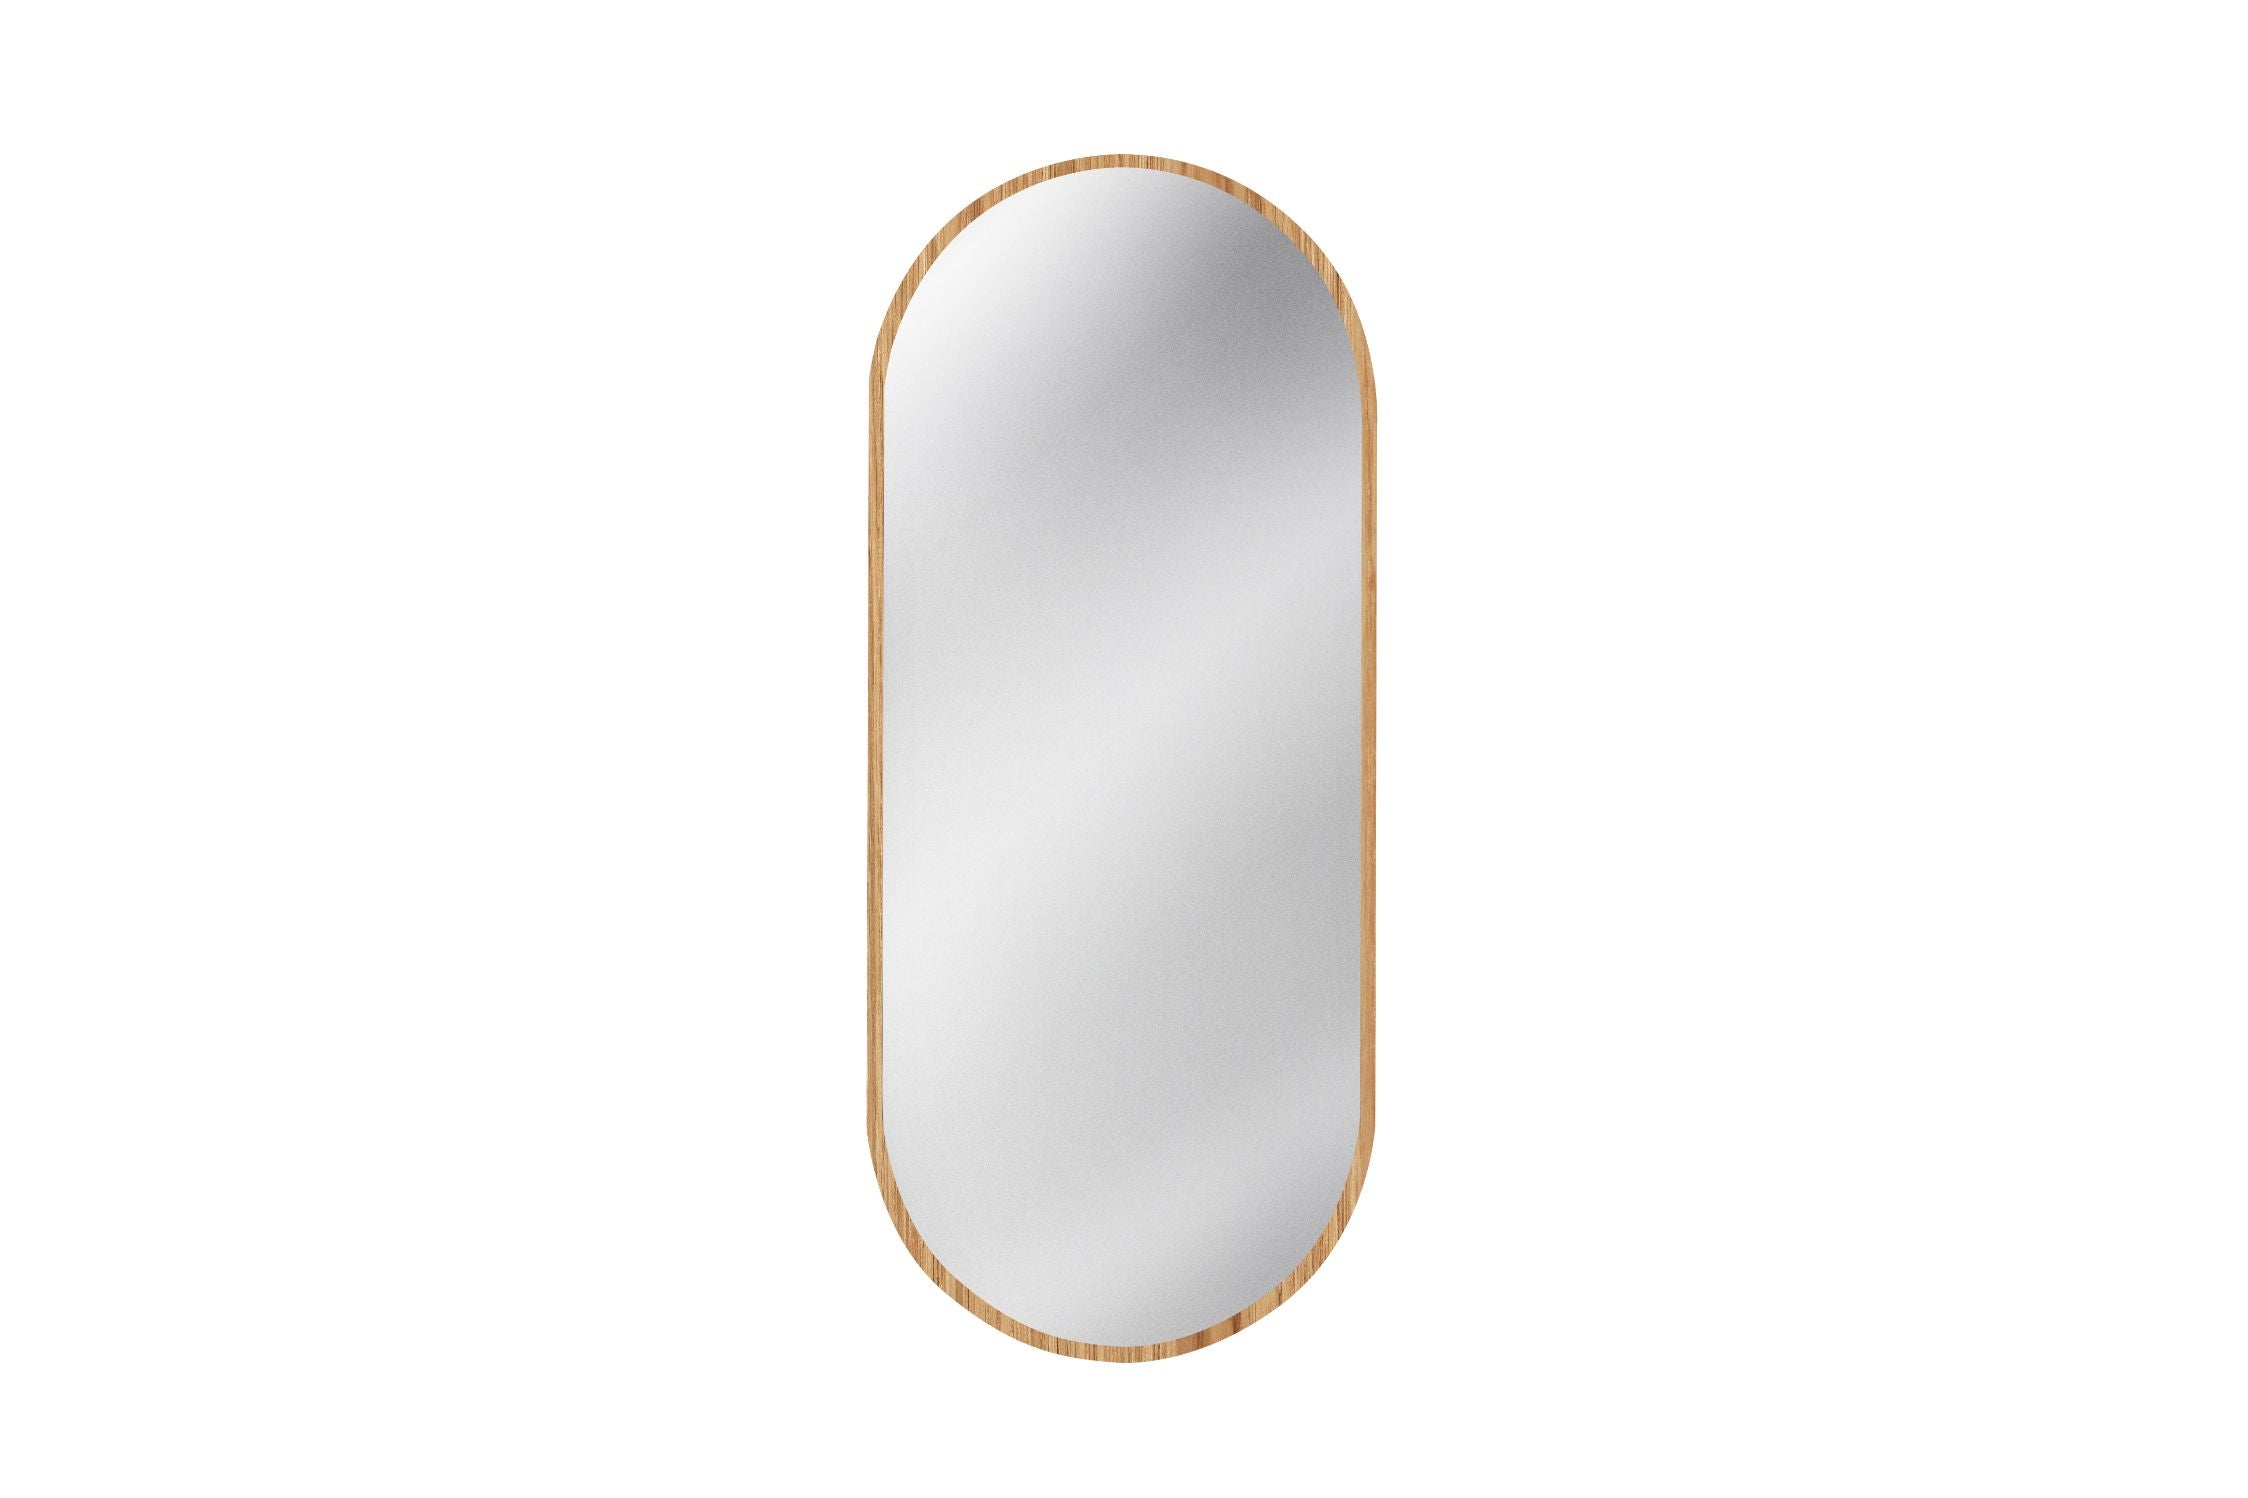 ISSY Blossom Mirror - Zuster Furniture